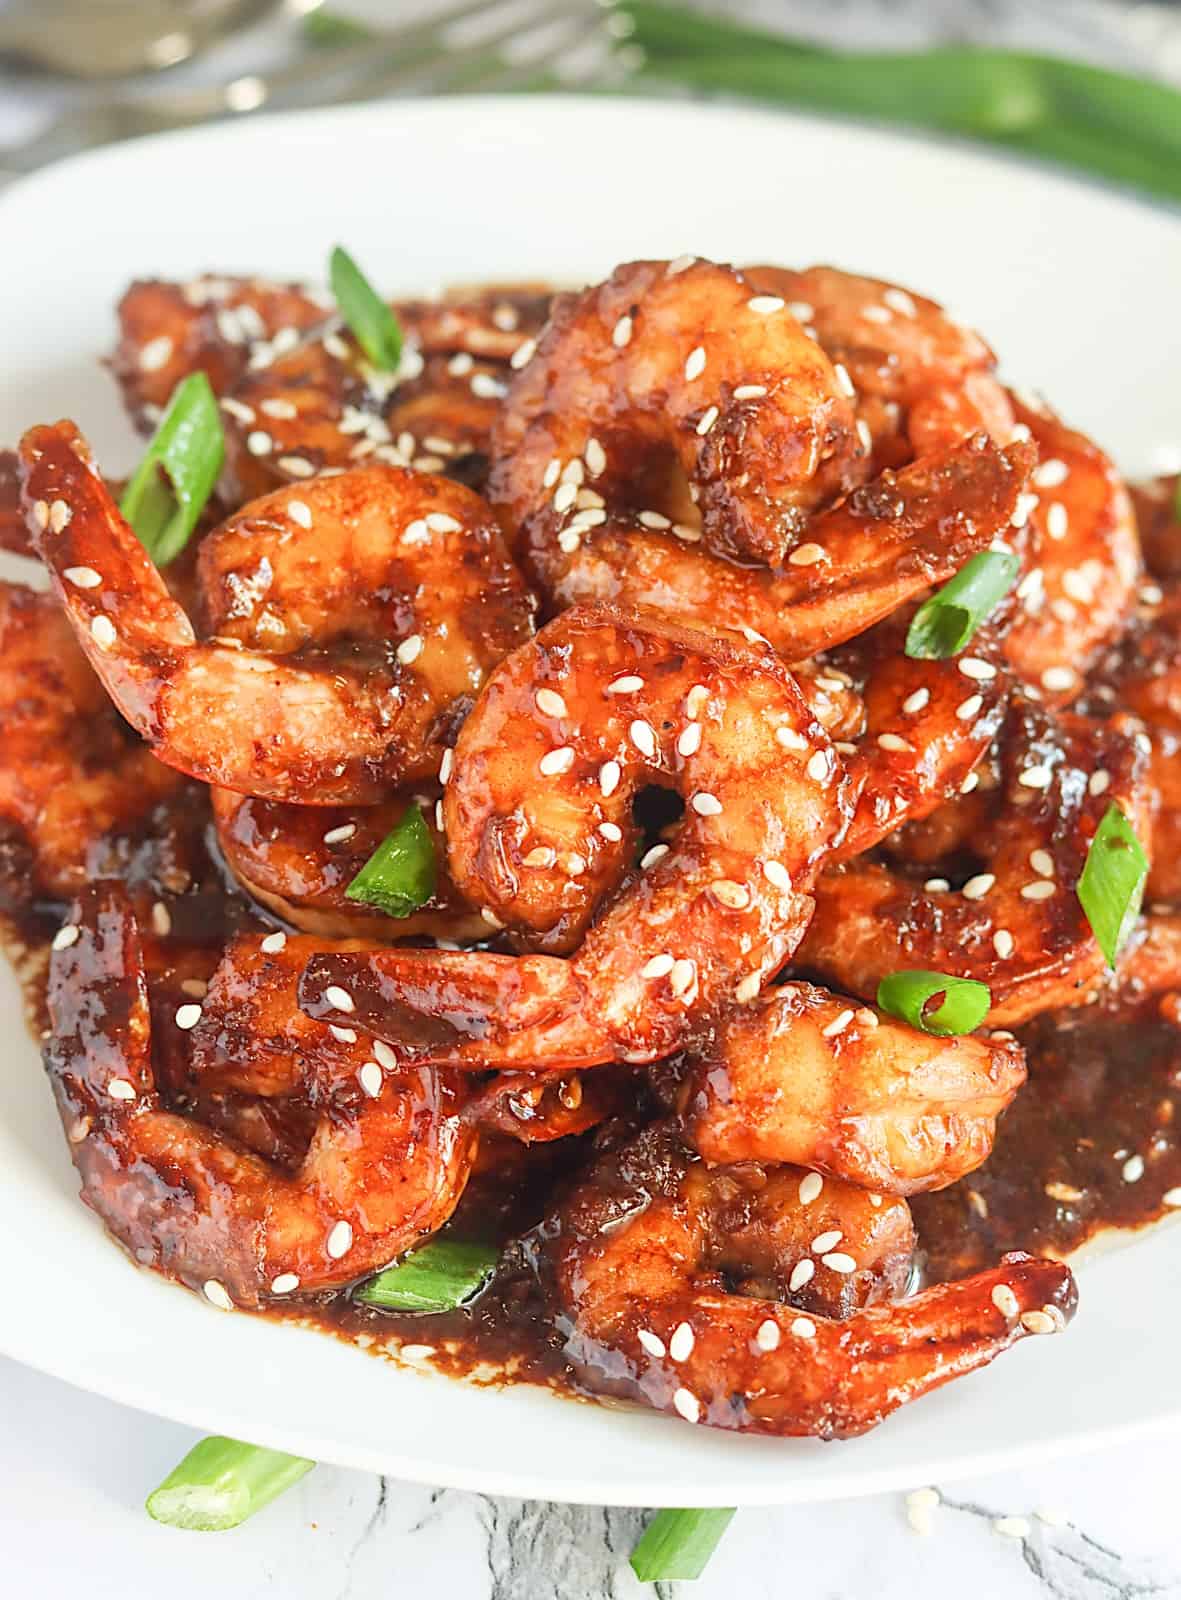 Enjoying steaming hot Teriyaki Shrimp garnished with sesame seeds and green onions on a white plate